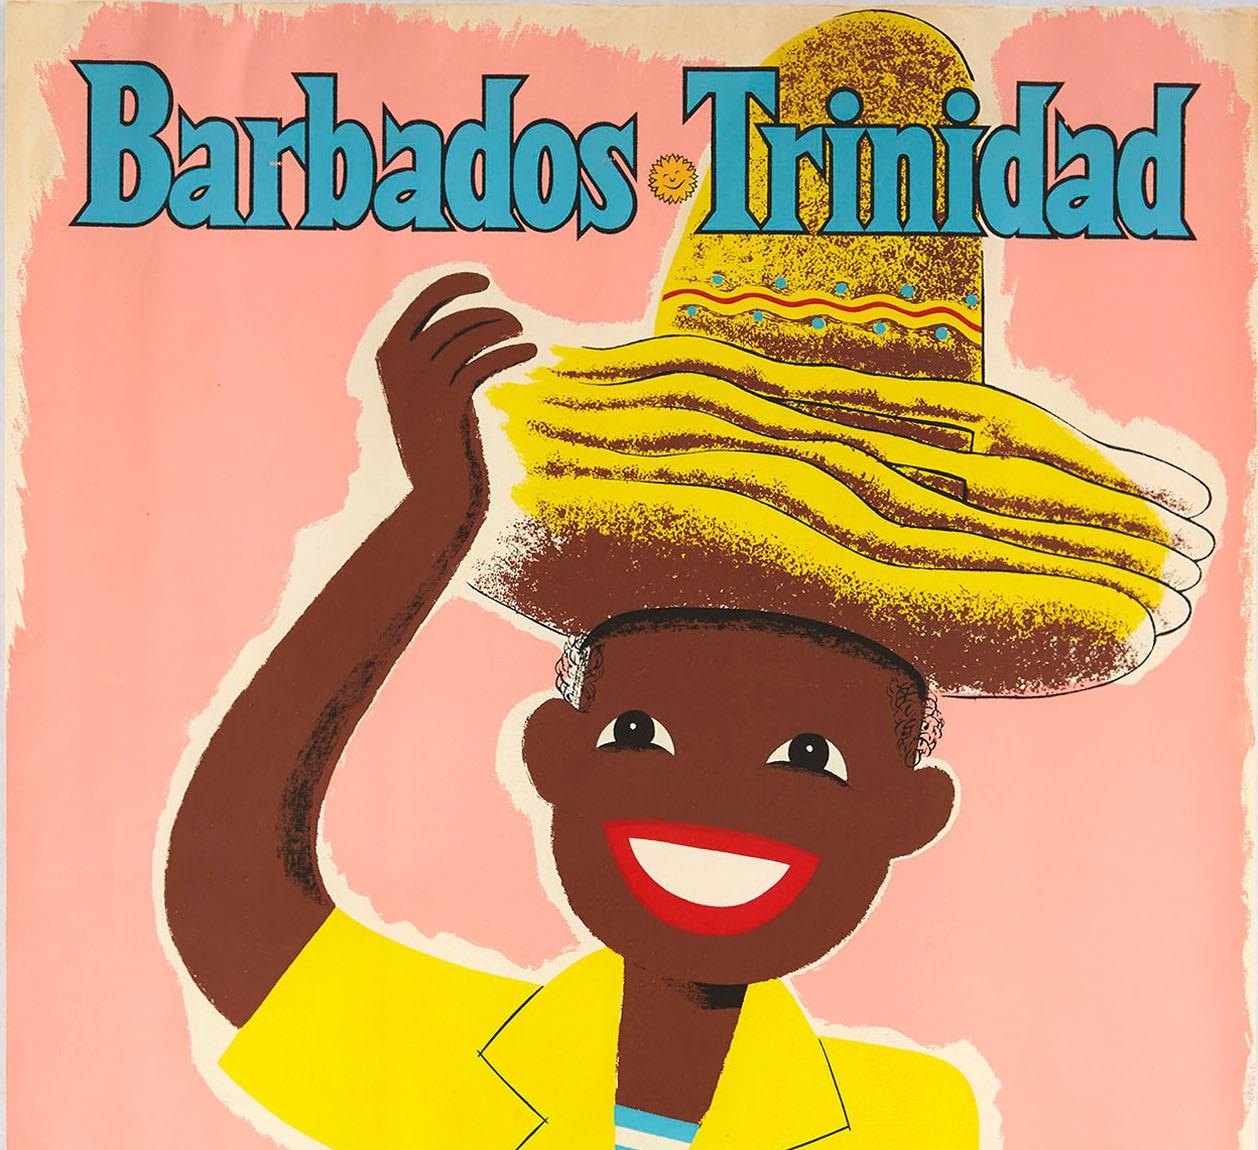 Original vintage travel poster for Barbados Trinidad Fly TCA Trans-Canada Airlines featuring a fun design depicting a smiling hat seller wearing a blue and white striped and yellow top and holding a pile of decorated straw hats on his head against a